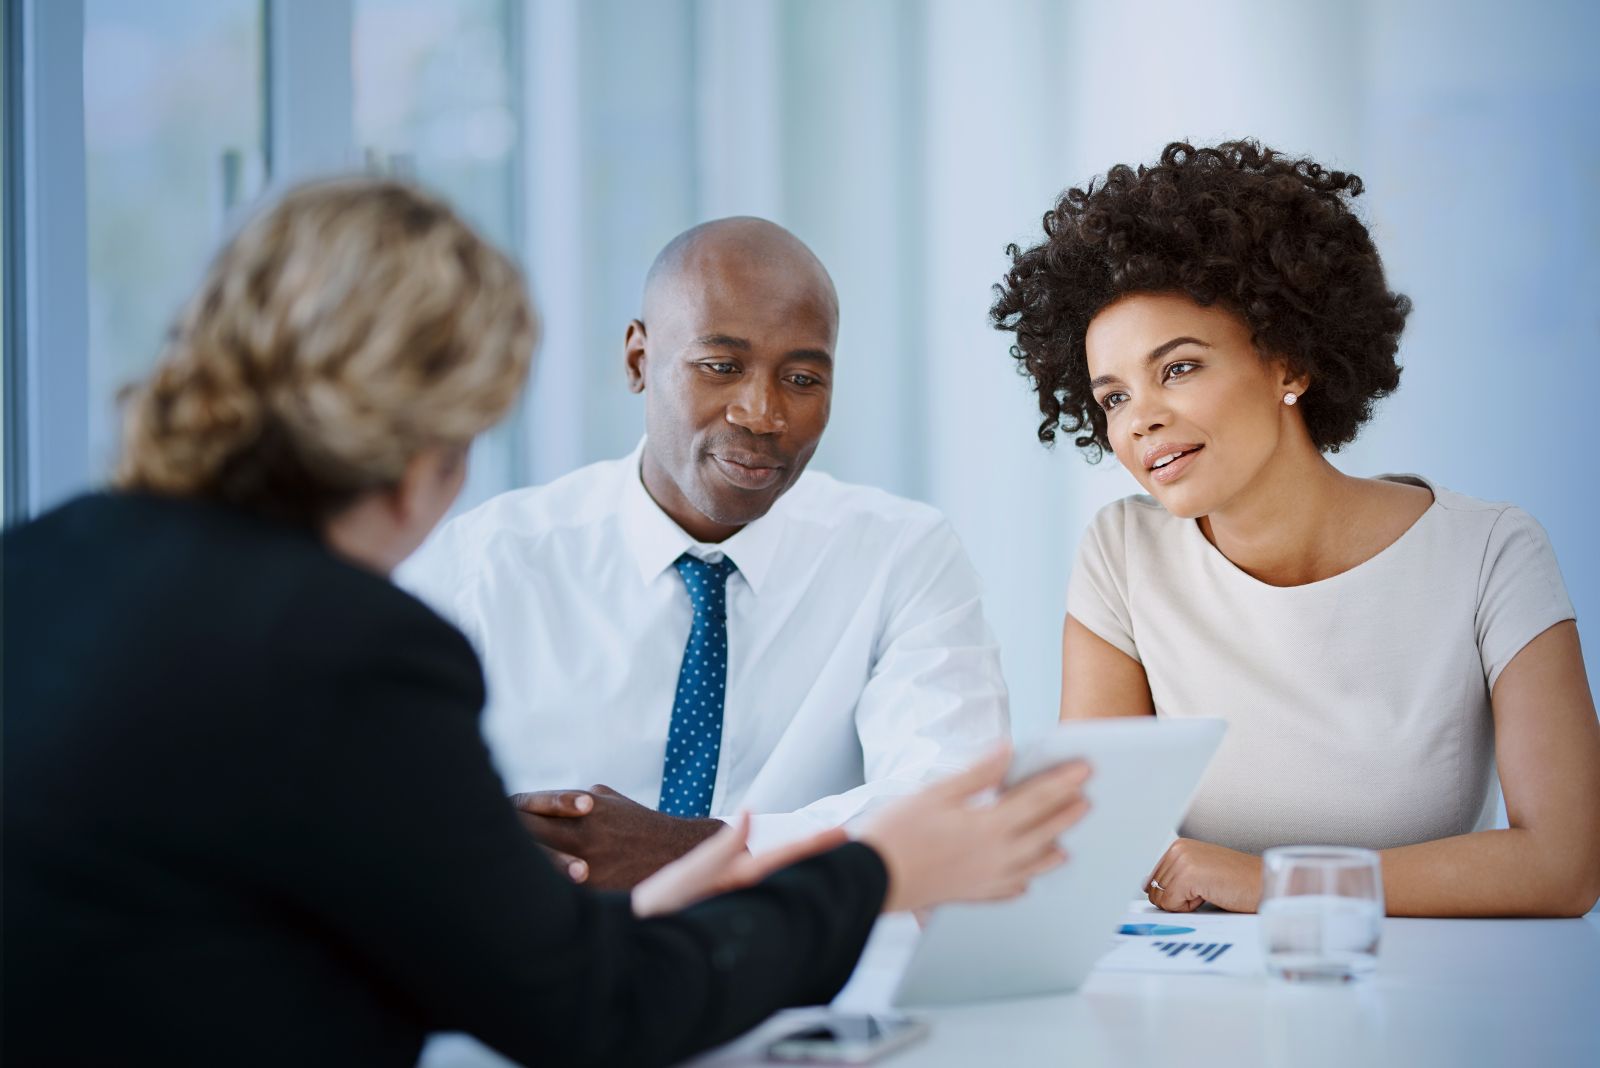 Preparing & Conducting Group Interviews | How Can Recruiters Master it?